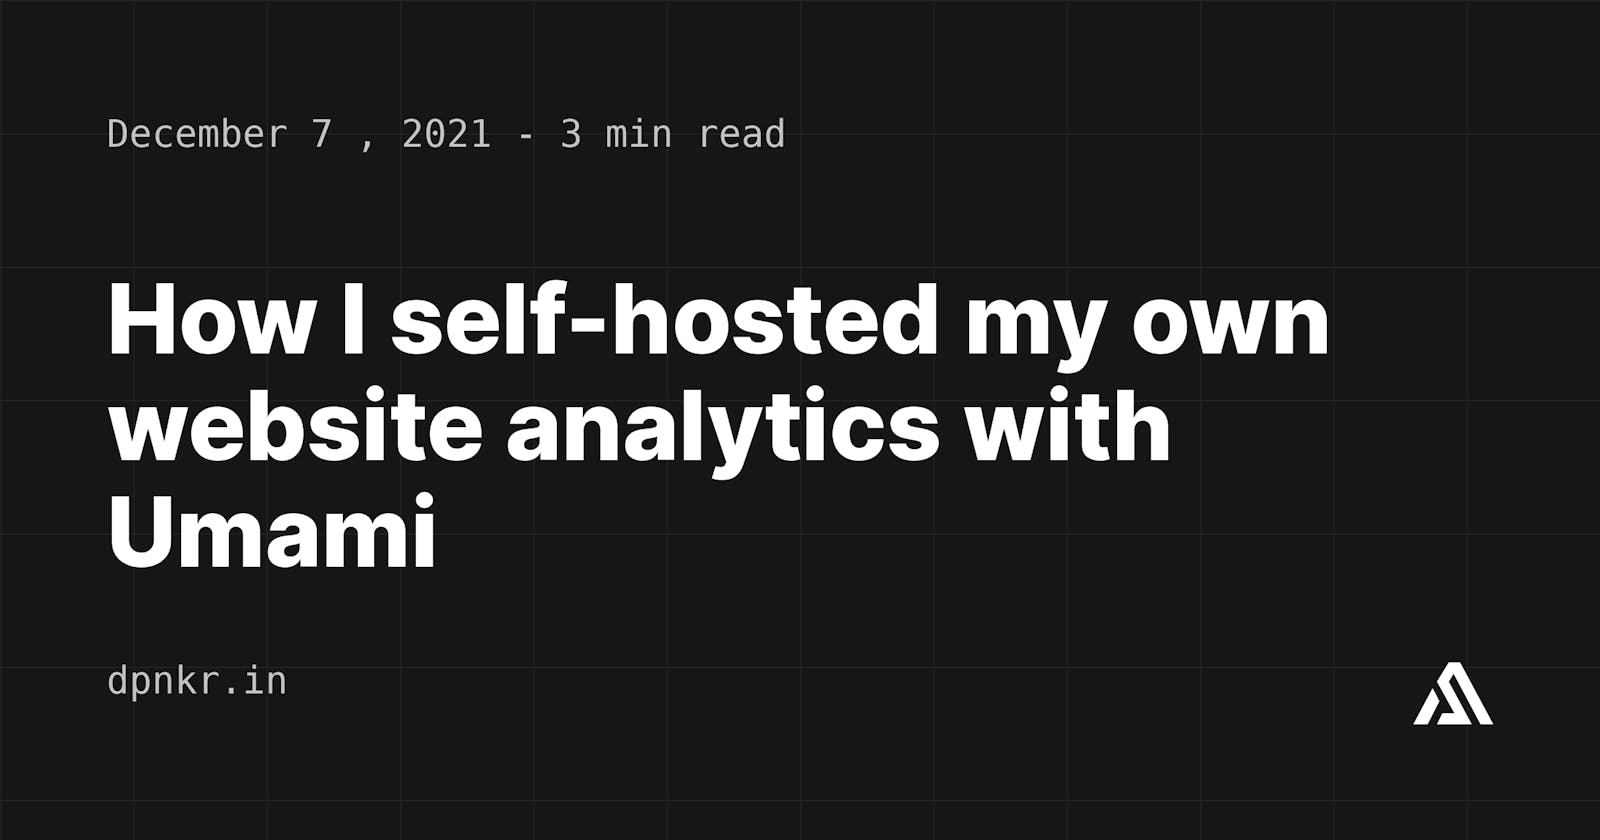 How I self-hosted my own website analytics with Umami